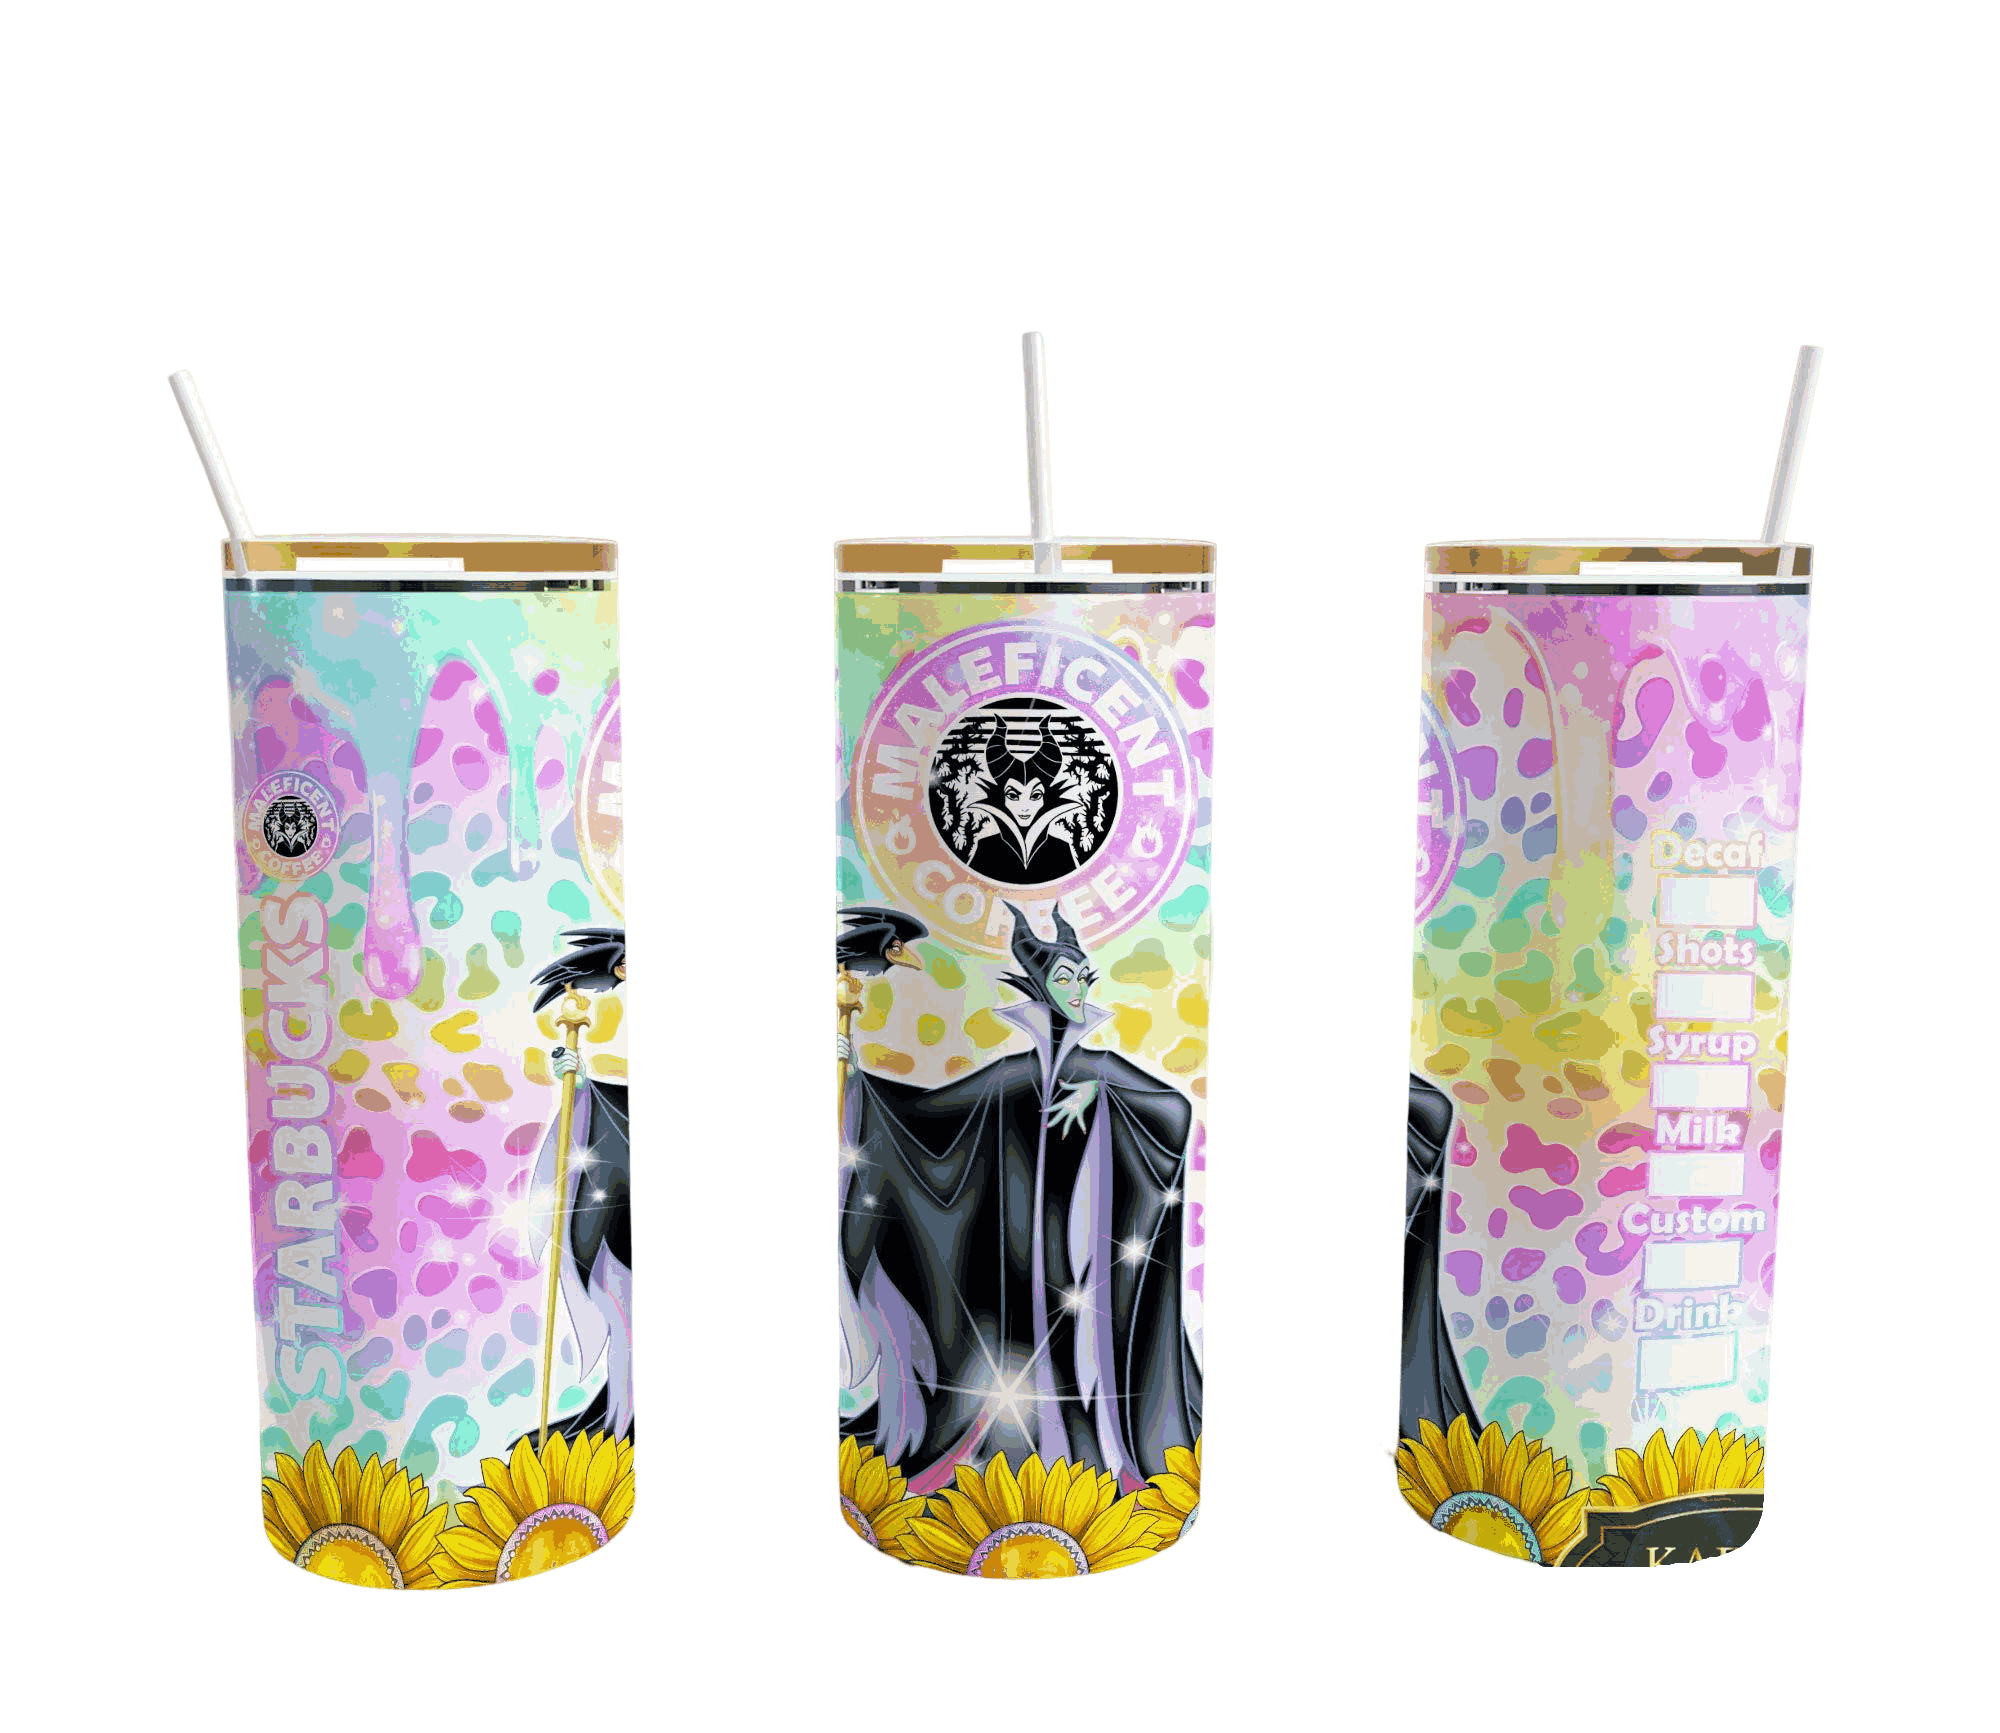 Maleficent Coffee, Seamless Leopard And Sun Flower At The Bottom, Comics Style